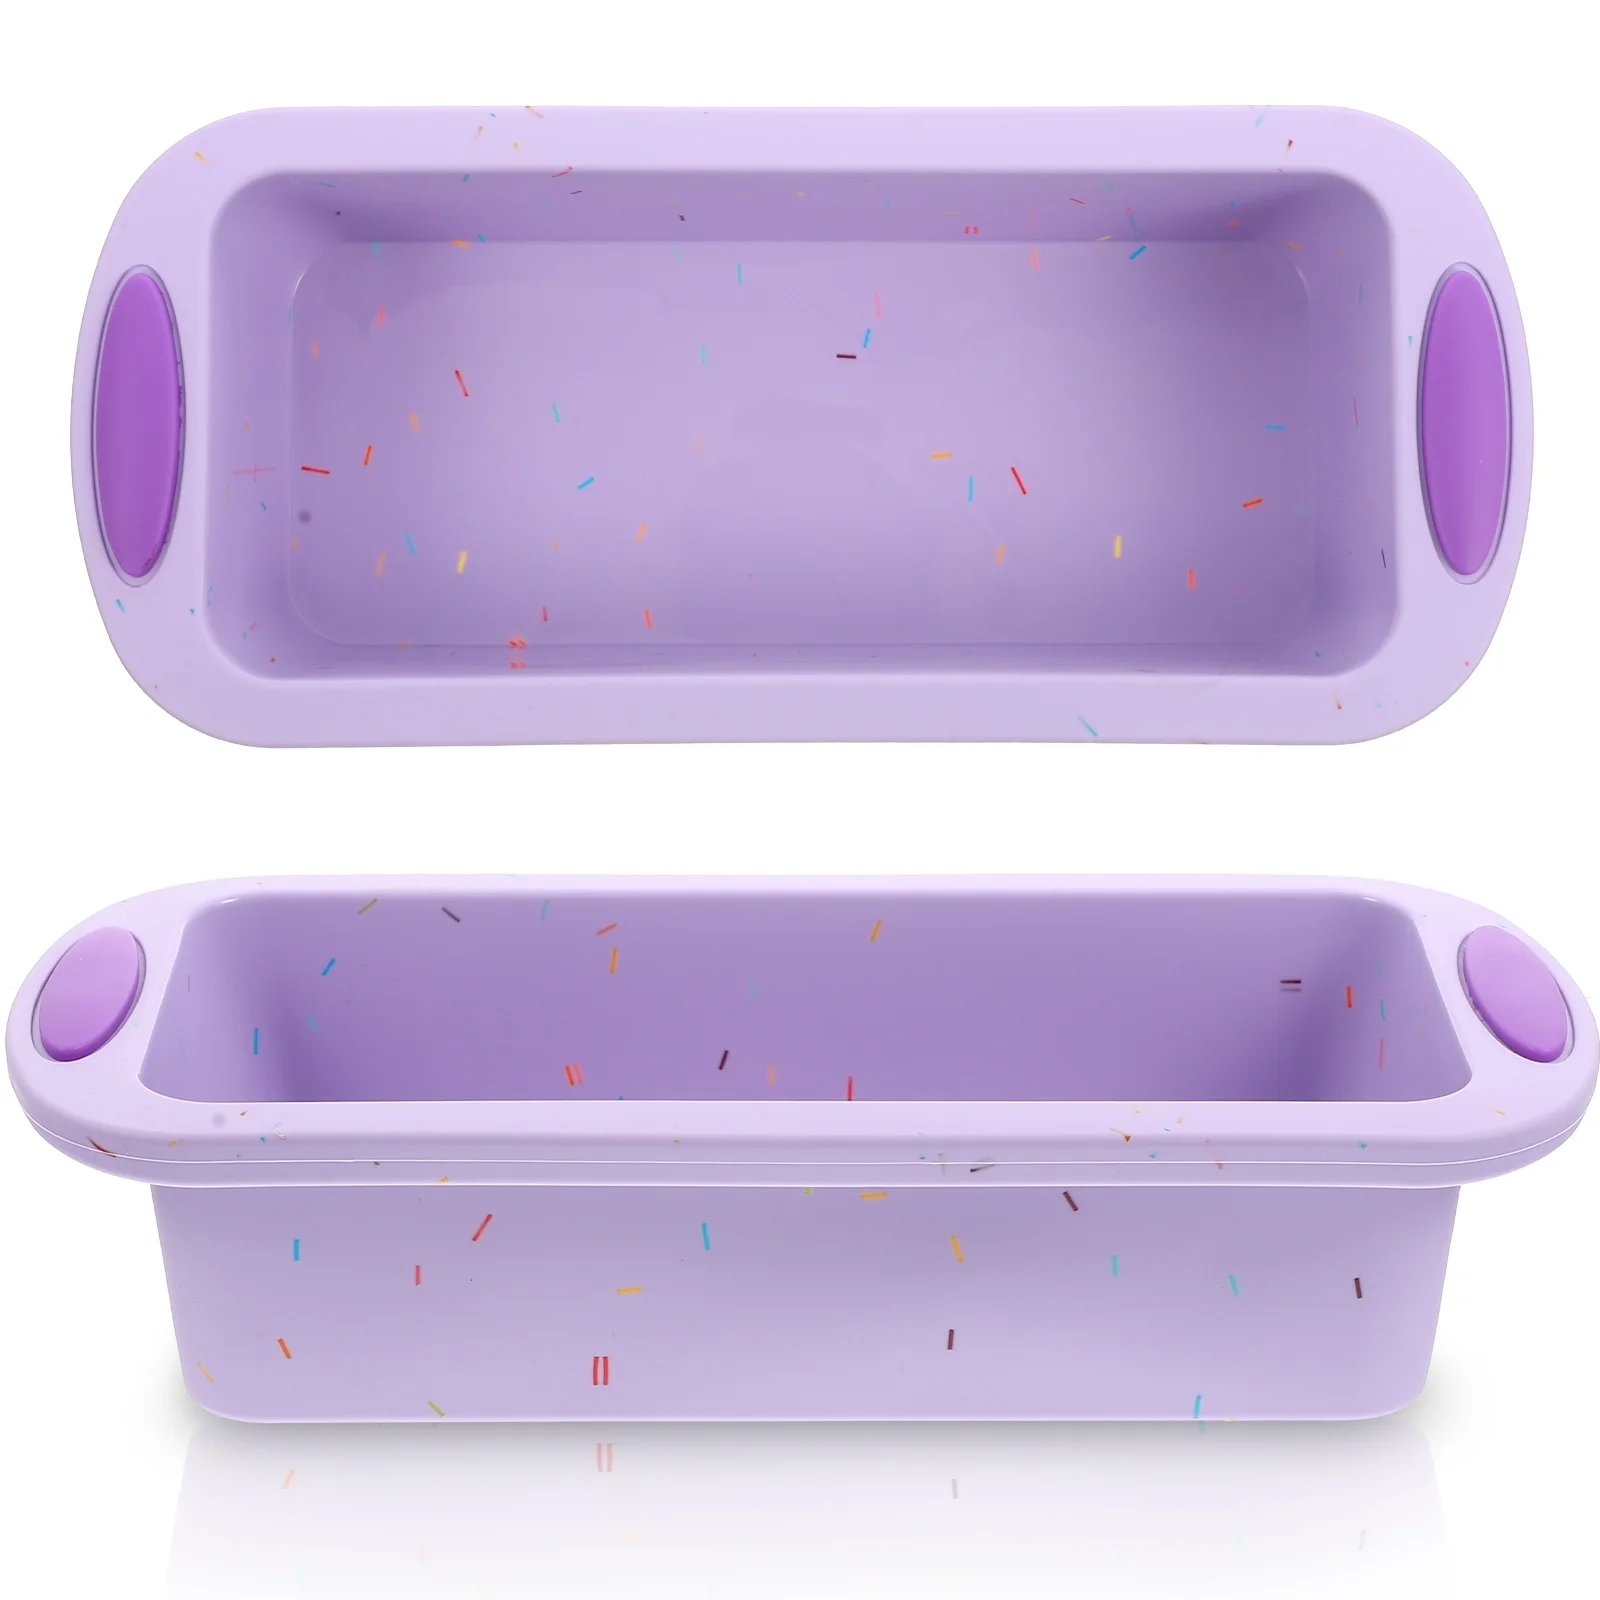 

Pan Silicone Toast Baking Loaf Bread Tray Cake Cooking Pans Mini Bakeware Reusable Oven Silione Box Handlerubber Nonstick Mousse